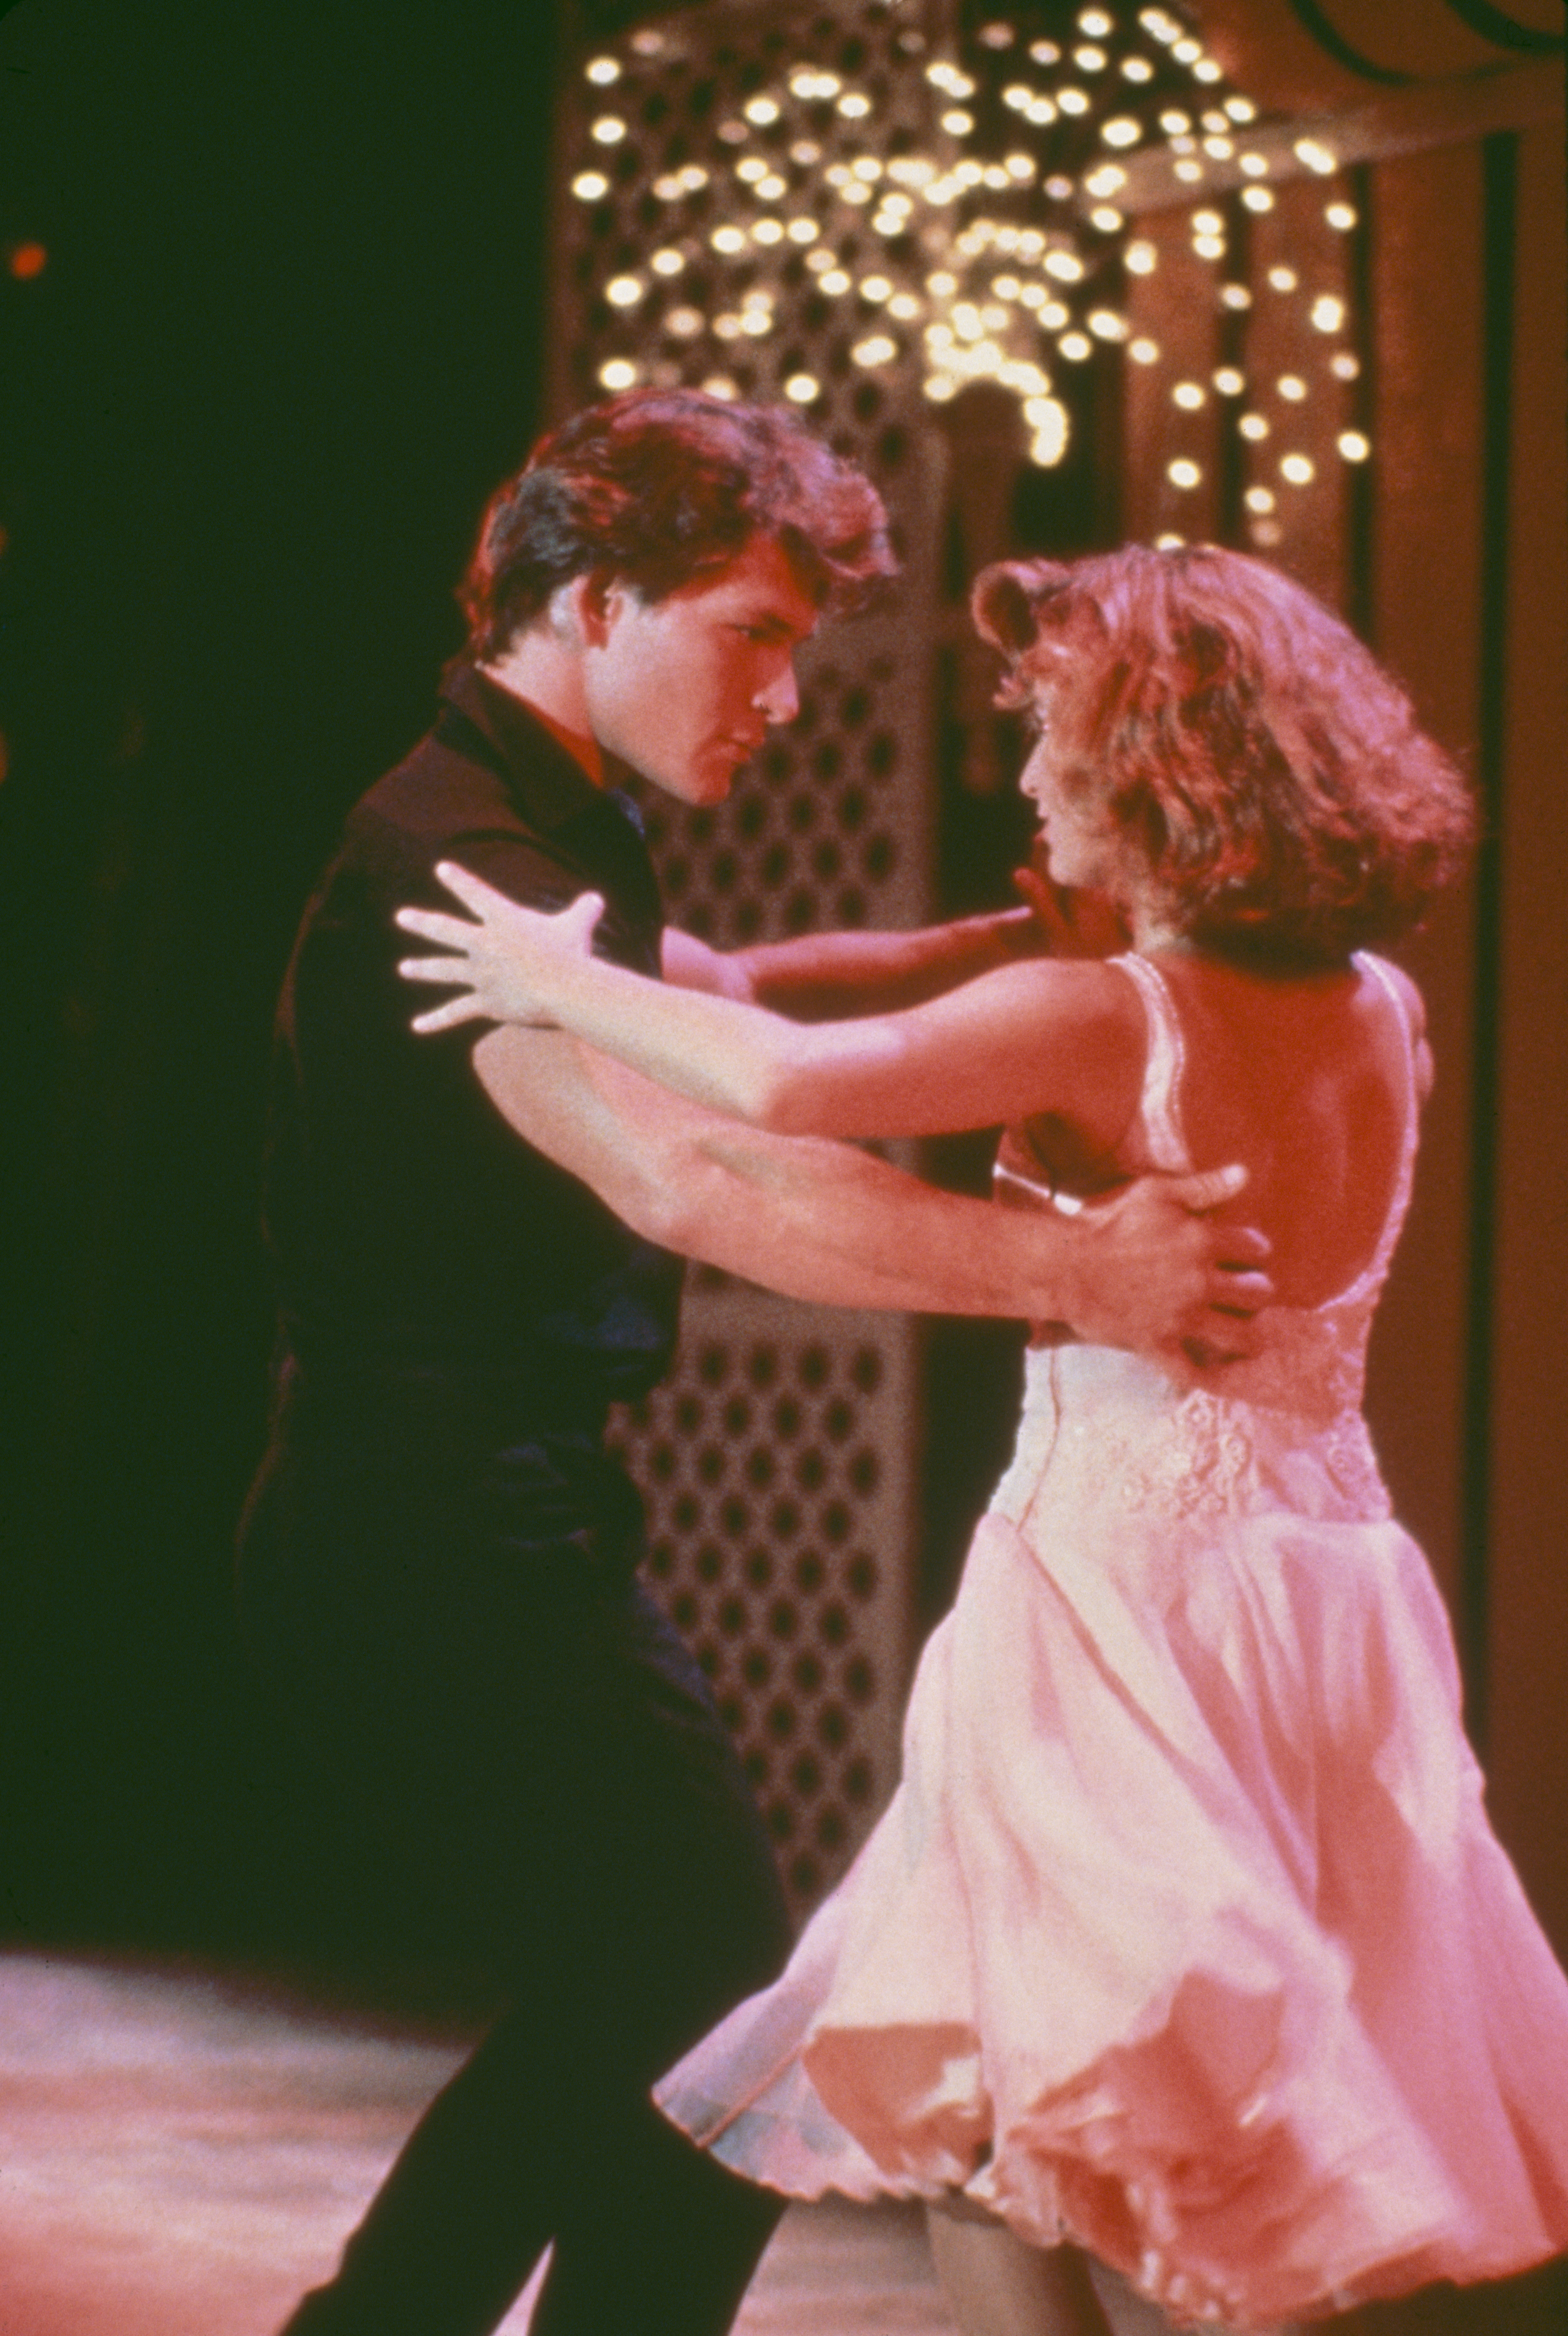 Patrick Swayze and Jennifer Grey star in the film "Dirty Dancing" in 1987. | Source: Getty Images